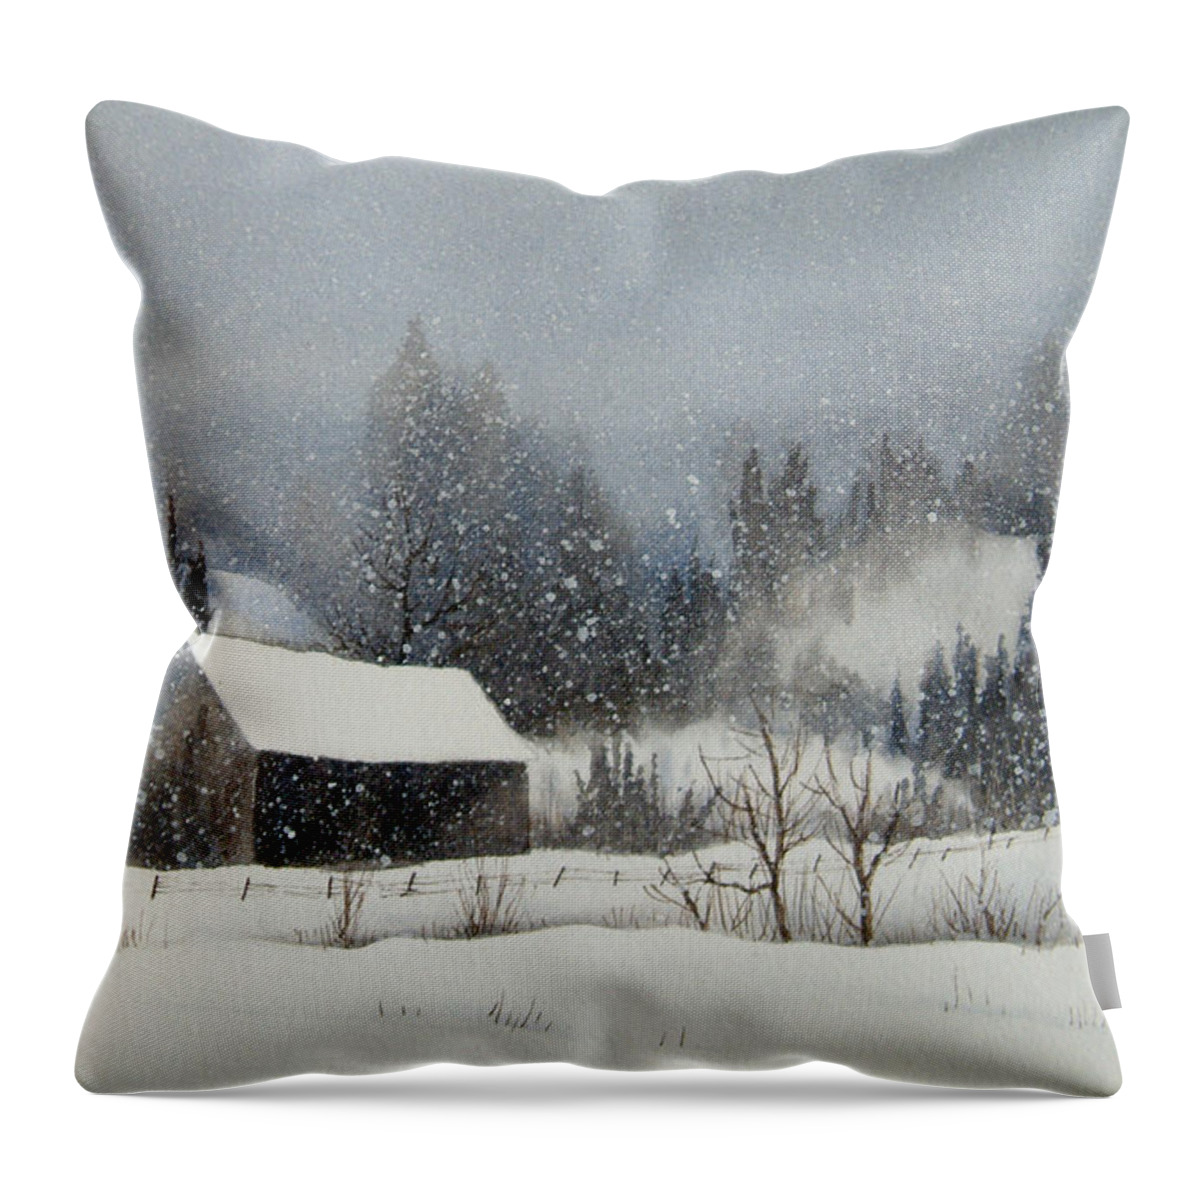 Watercolor Throw Pillow featuring the painting Snow Softly by Karen Richardson